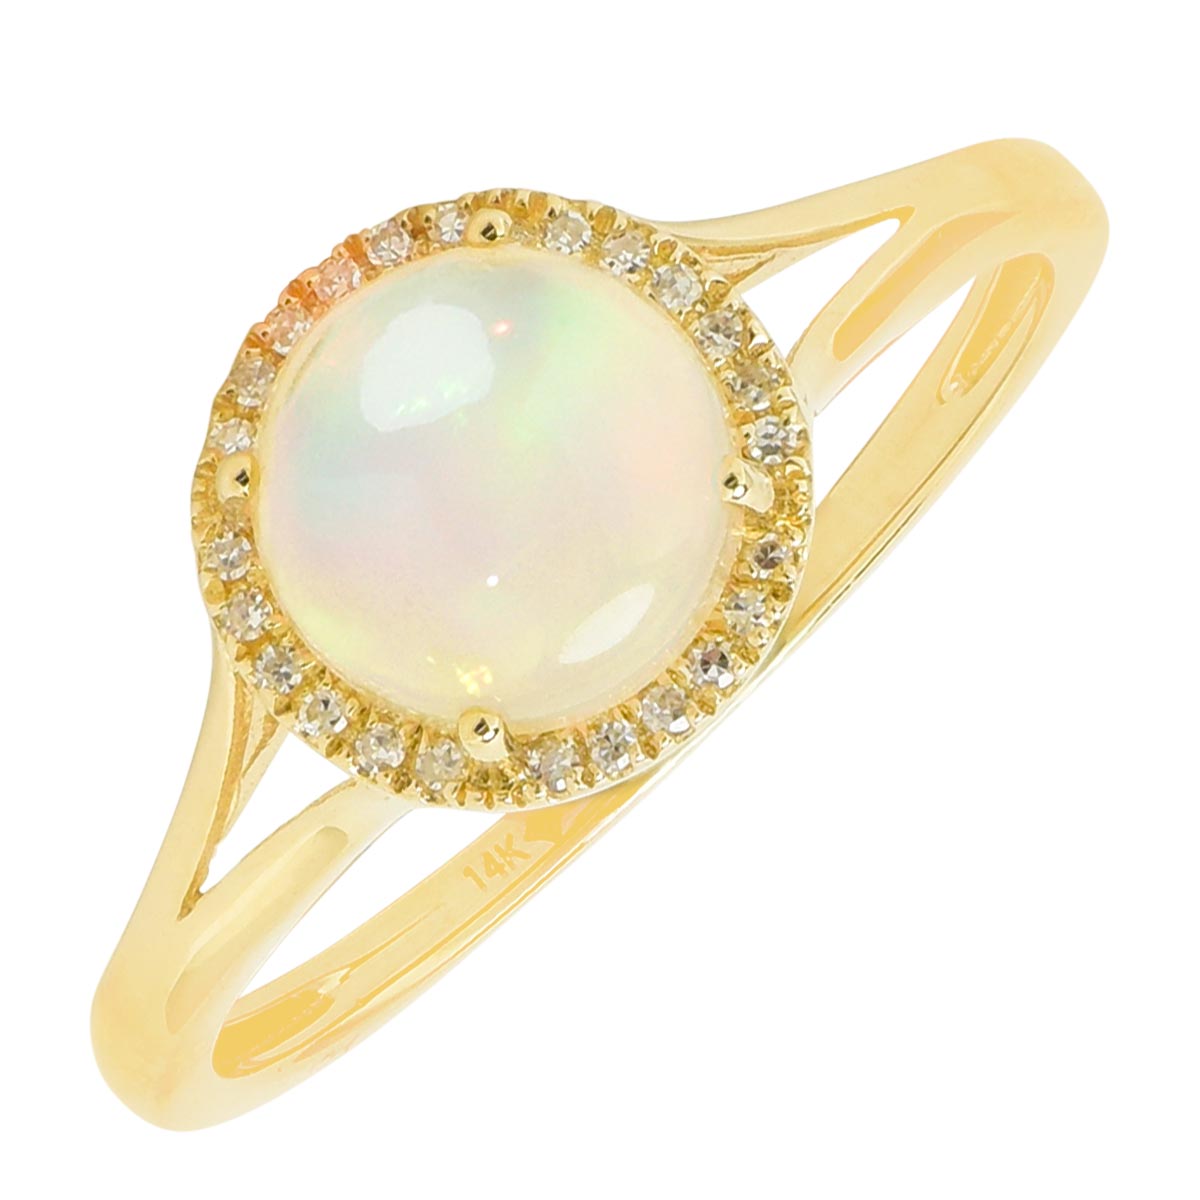 Madison L Ethiopian Opal Halo Ring in 14kt Yellow Gold with Diamonds (1/20ct tw)